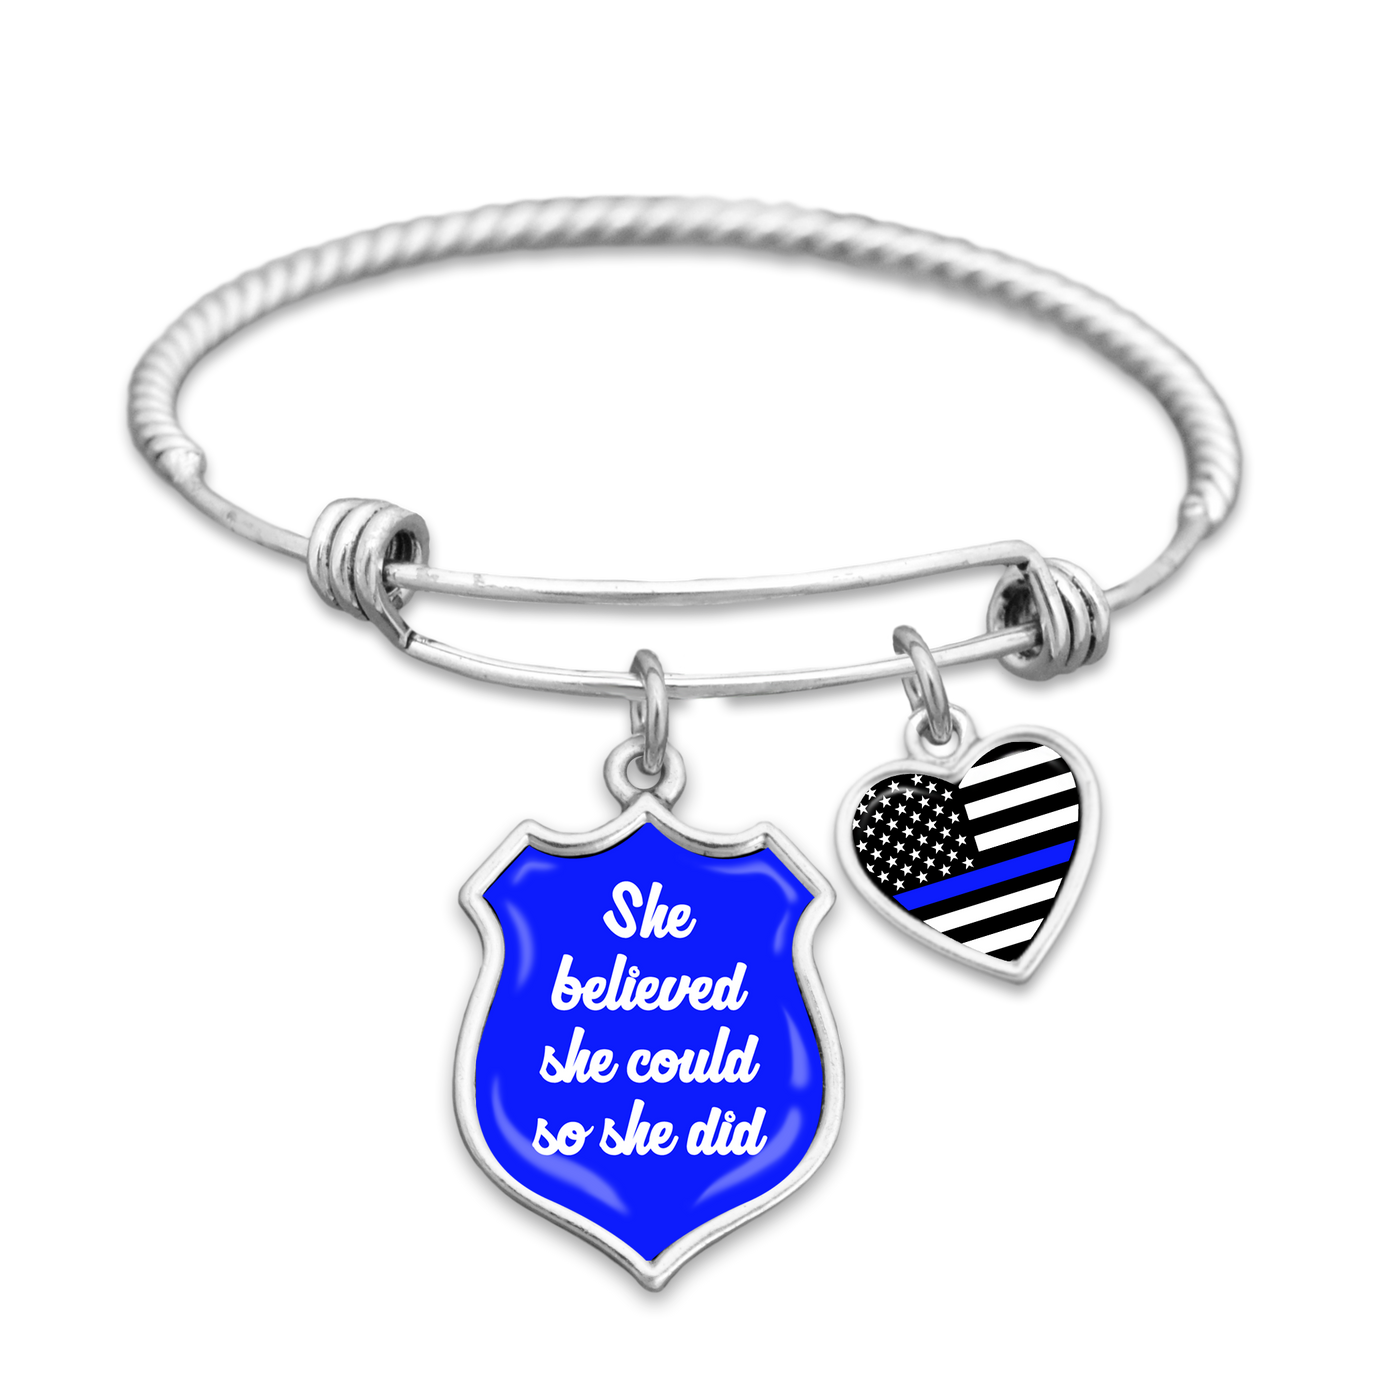 Thin Blue Line She Believed She Could So She Did Charm Bracelet